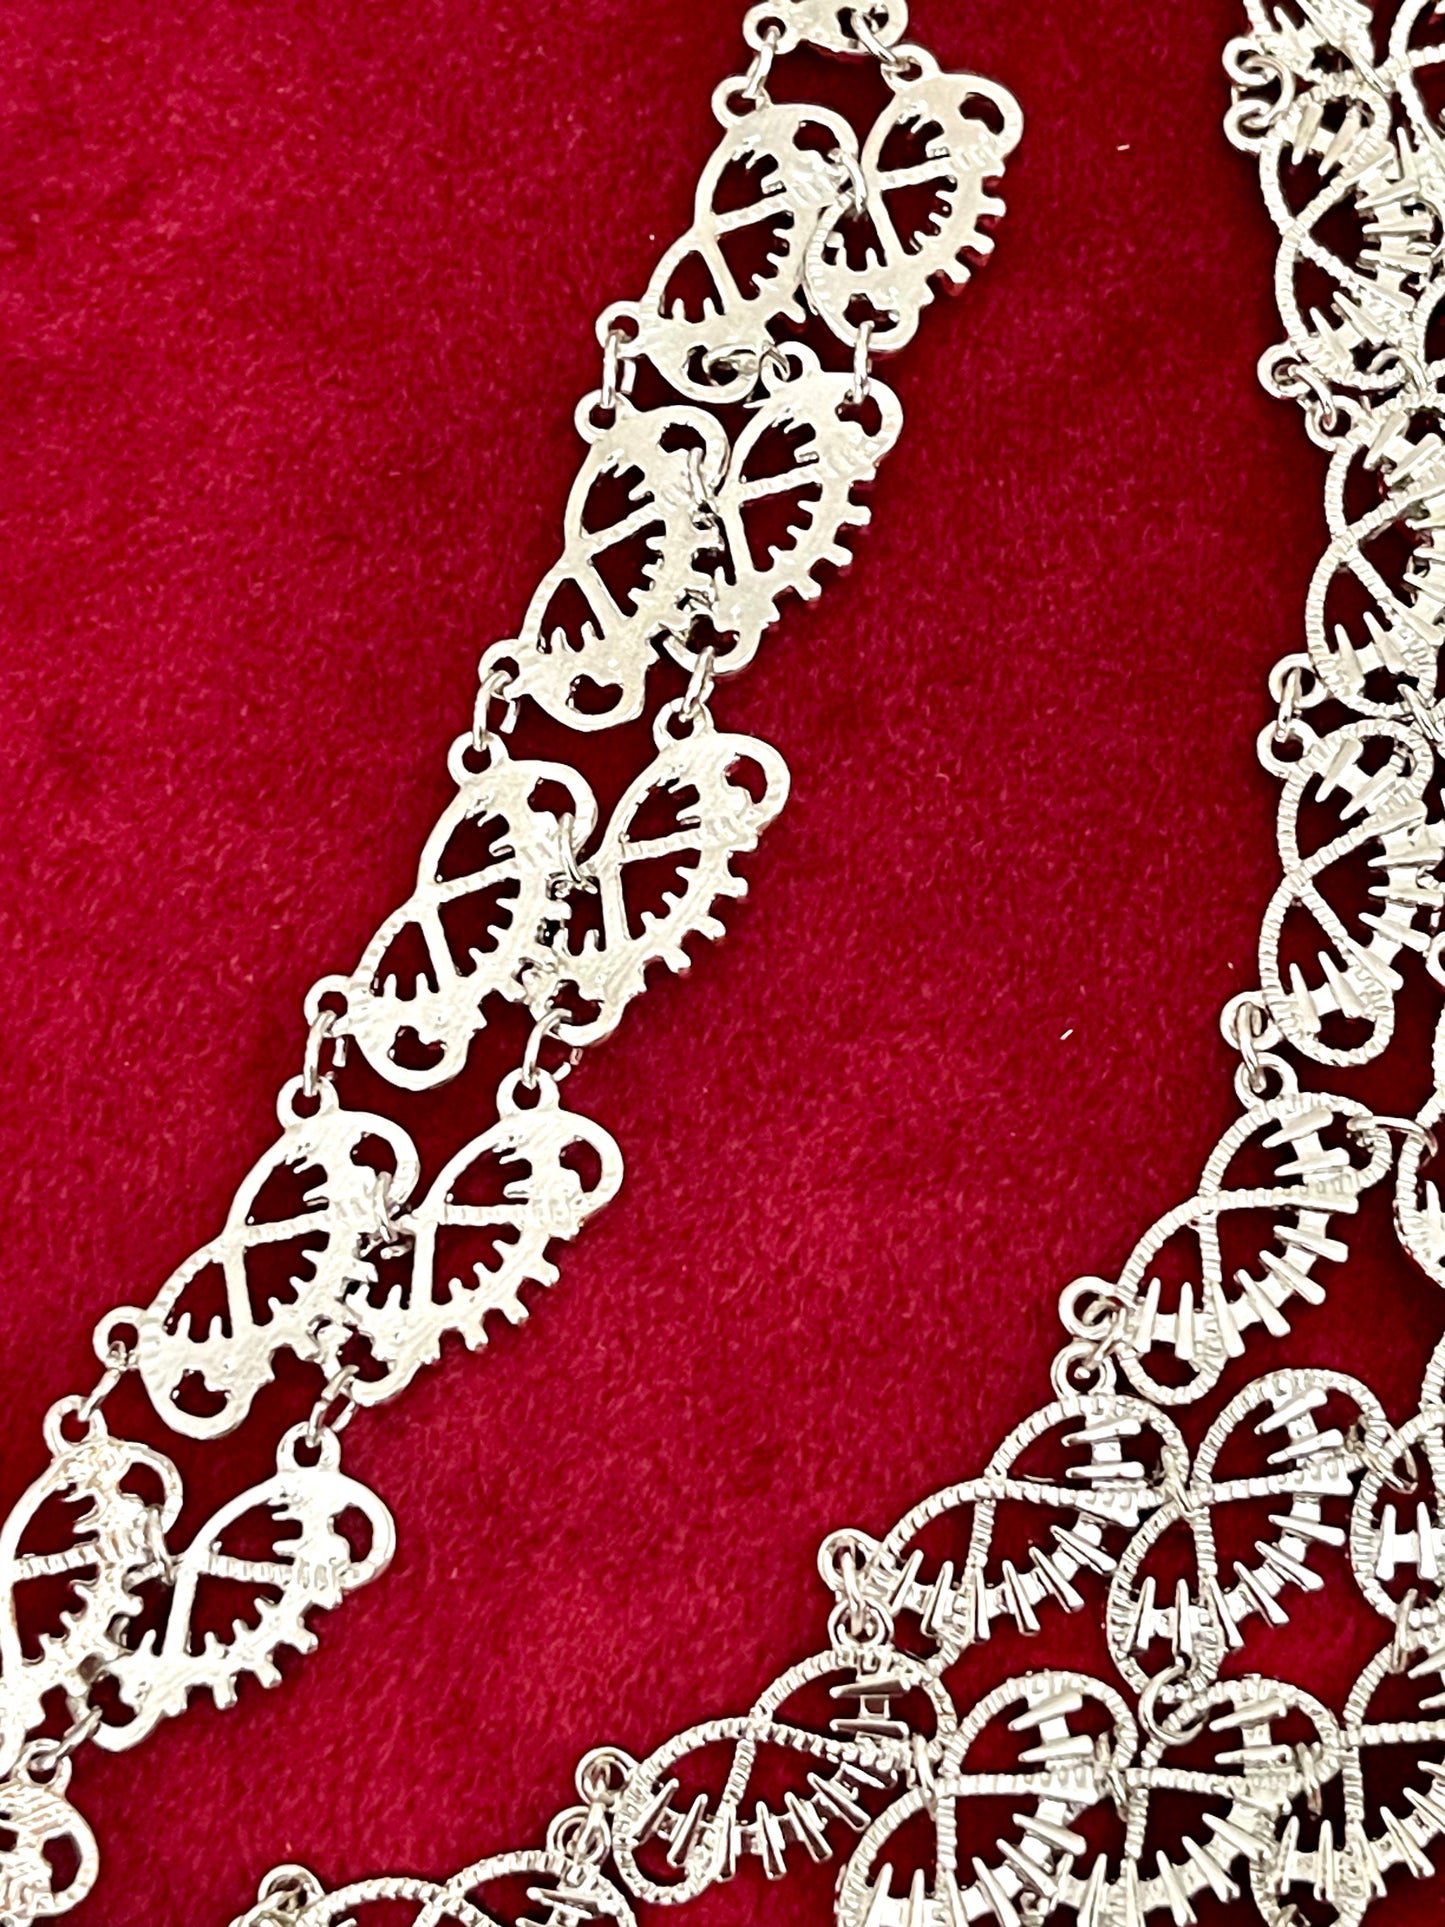 Silver Metal Scarf Necklace Arabesque Style